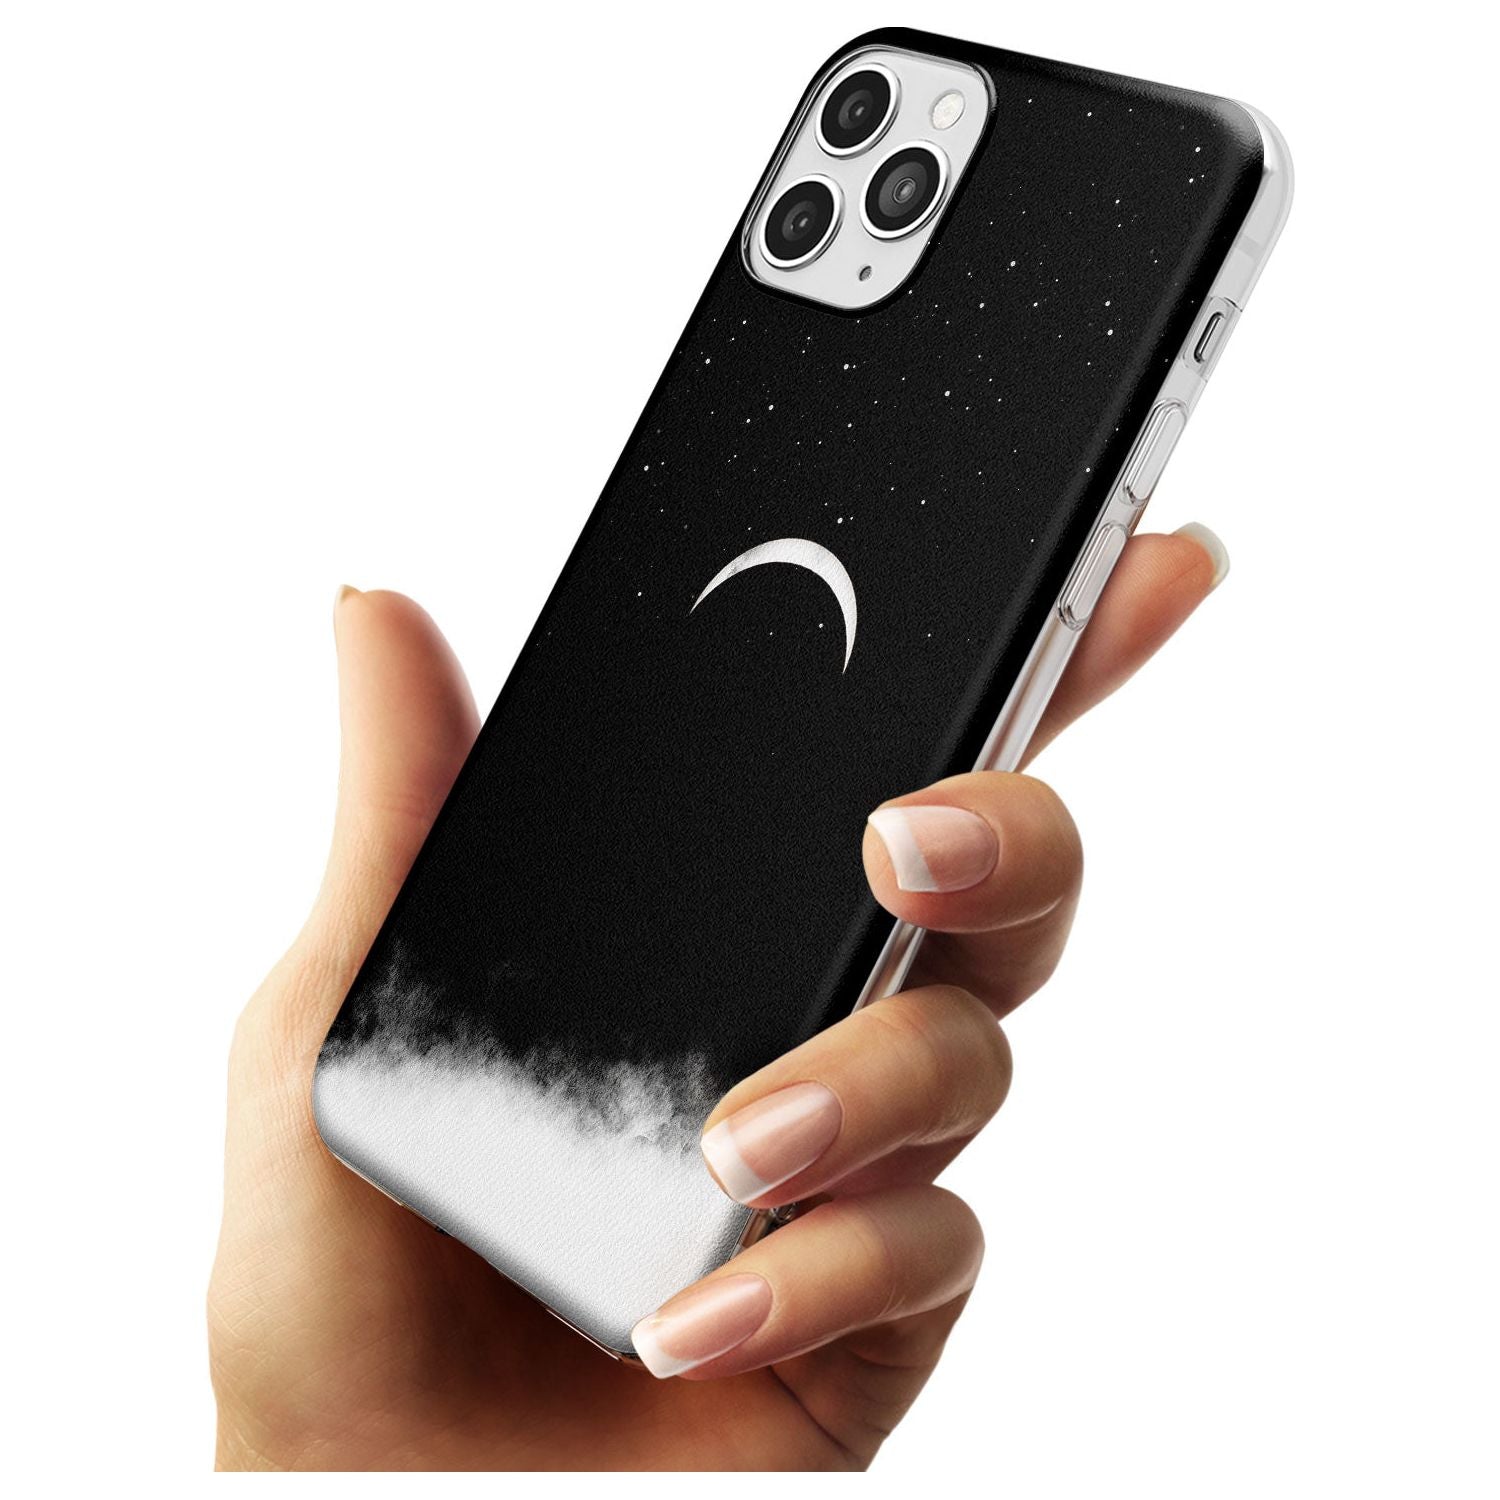 Upside Down Crescent Moon Slim TPU Phone Case for iPhone 11 Pro Max